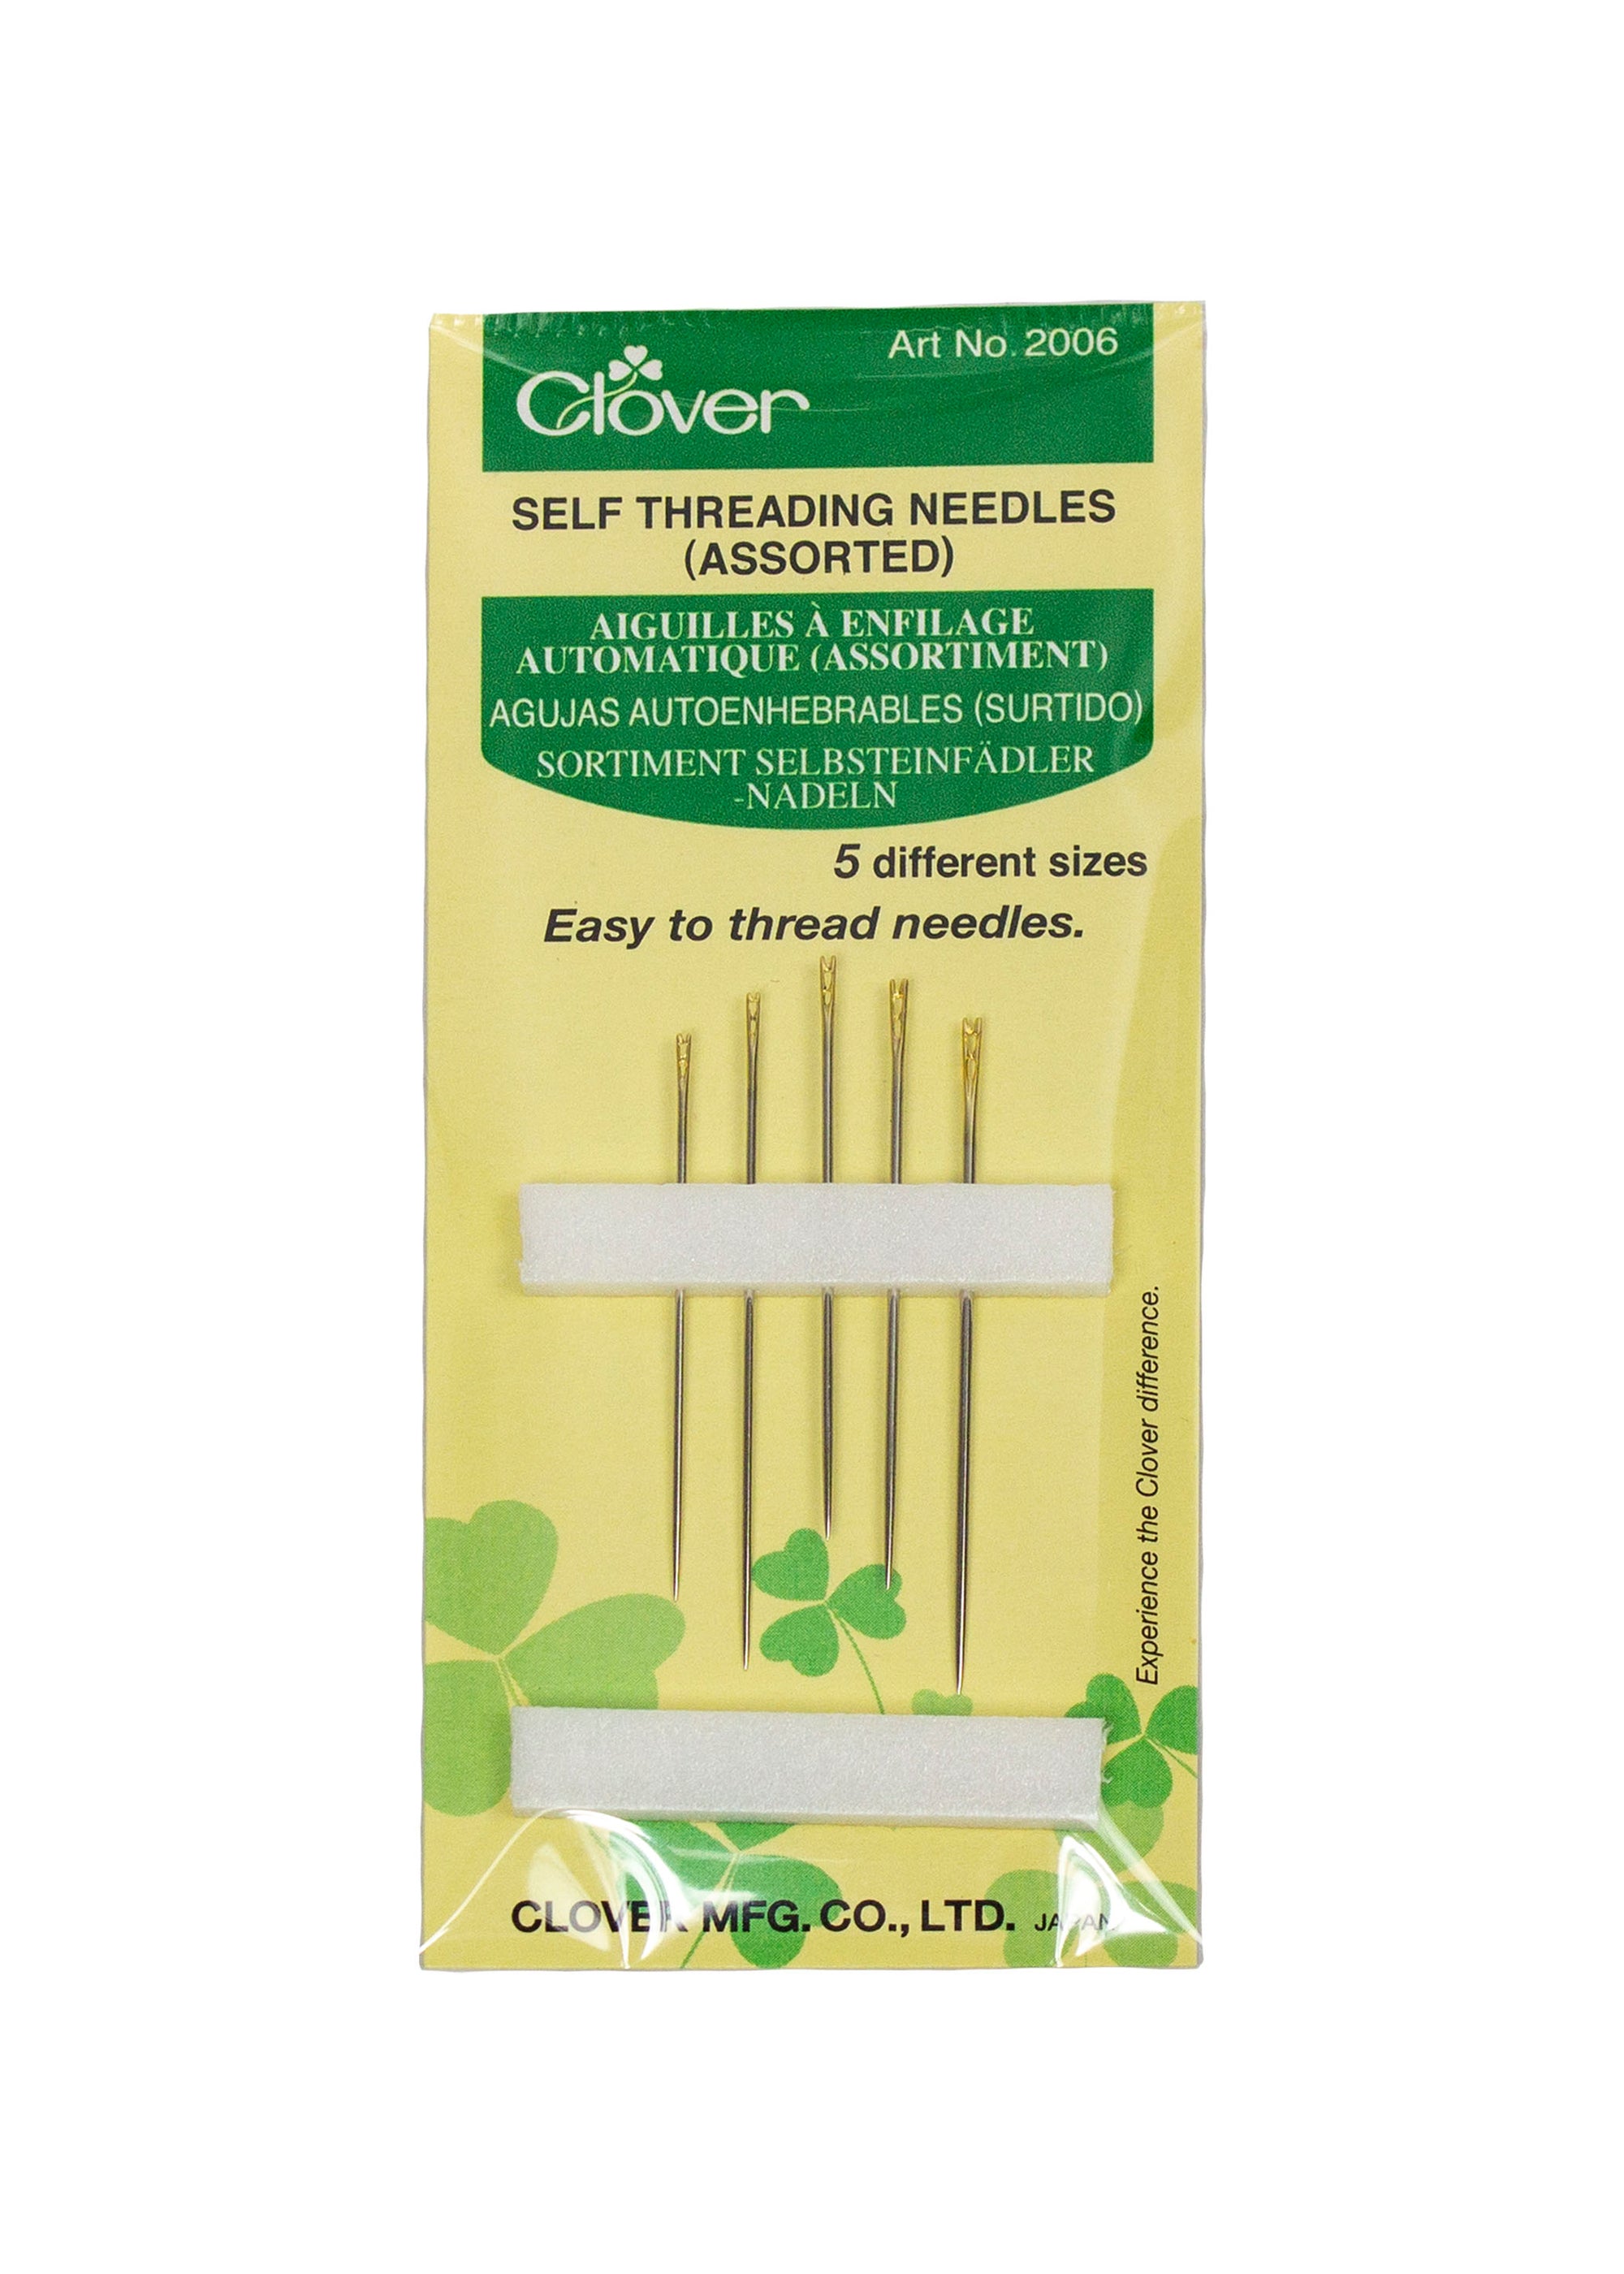 Clover Embroidery Needle Threader Accessory